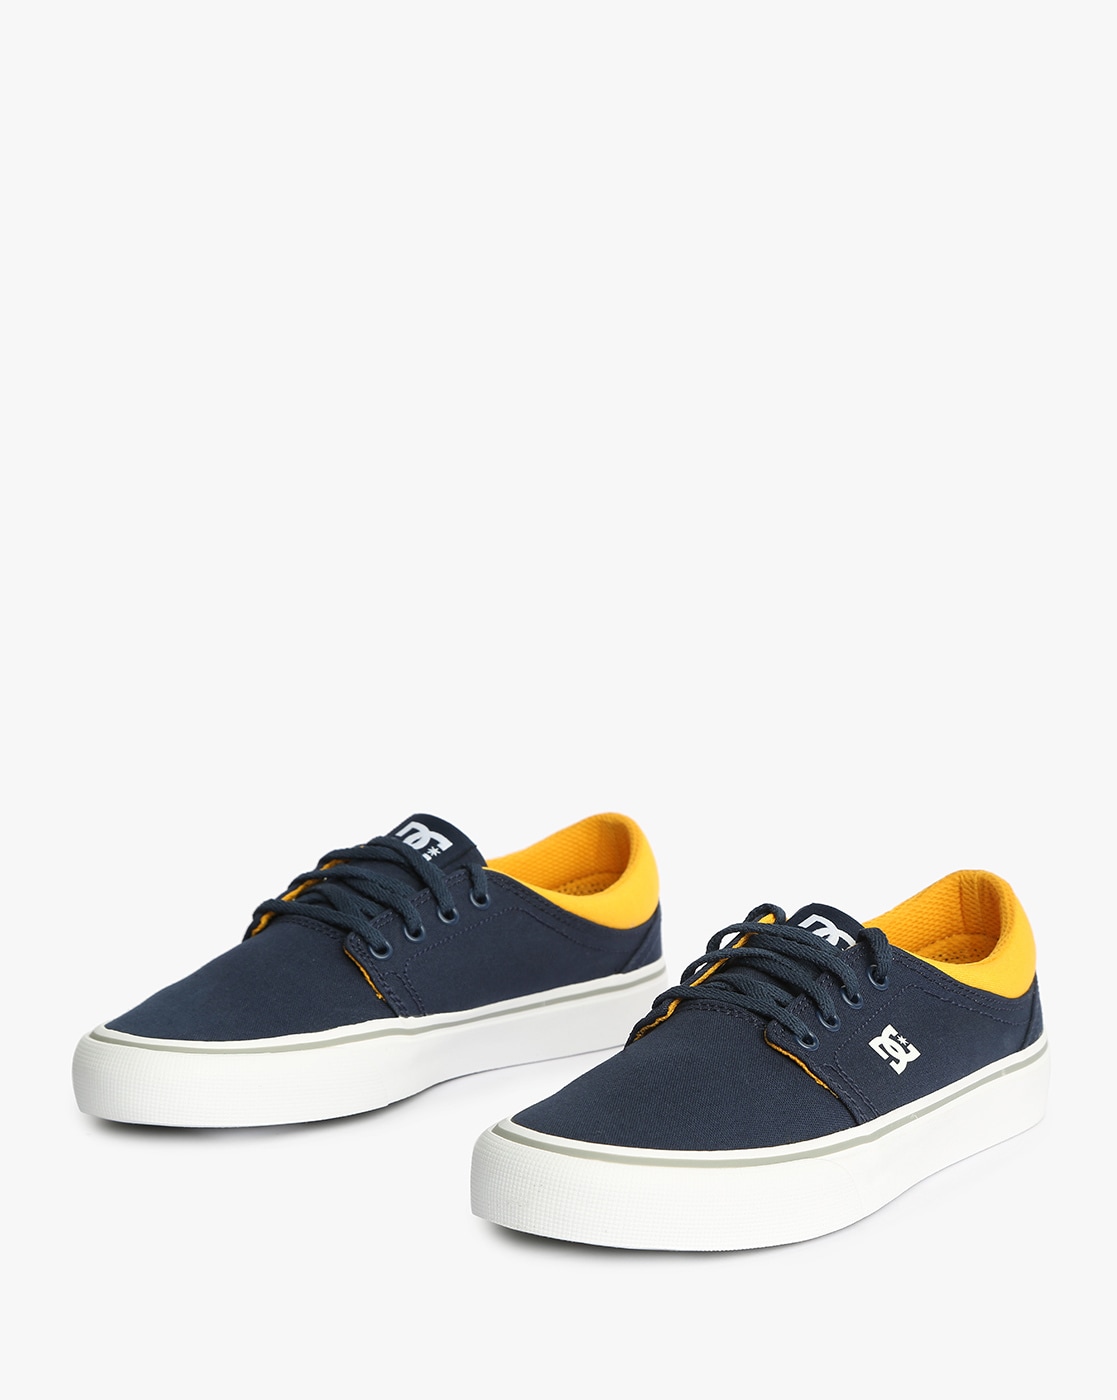 blue and yellow dc shoes